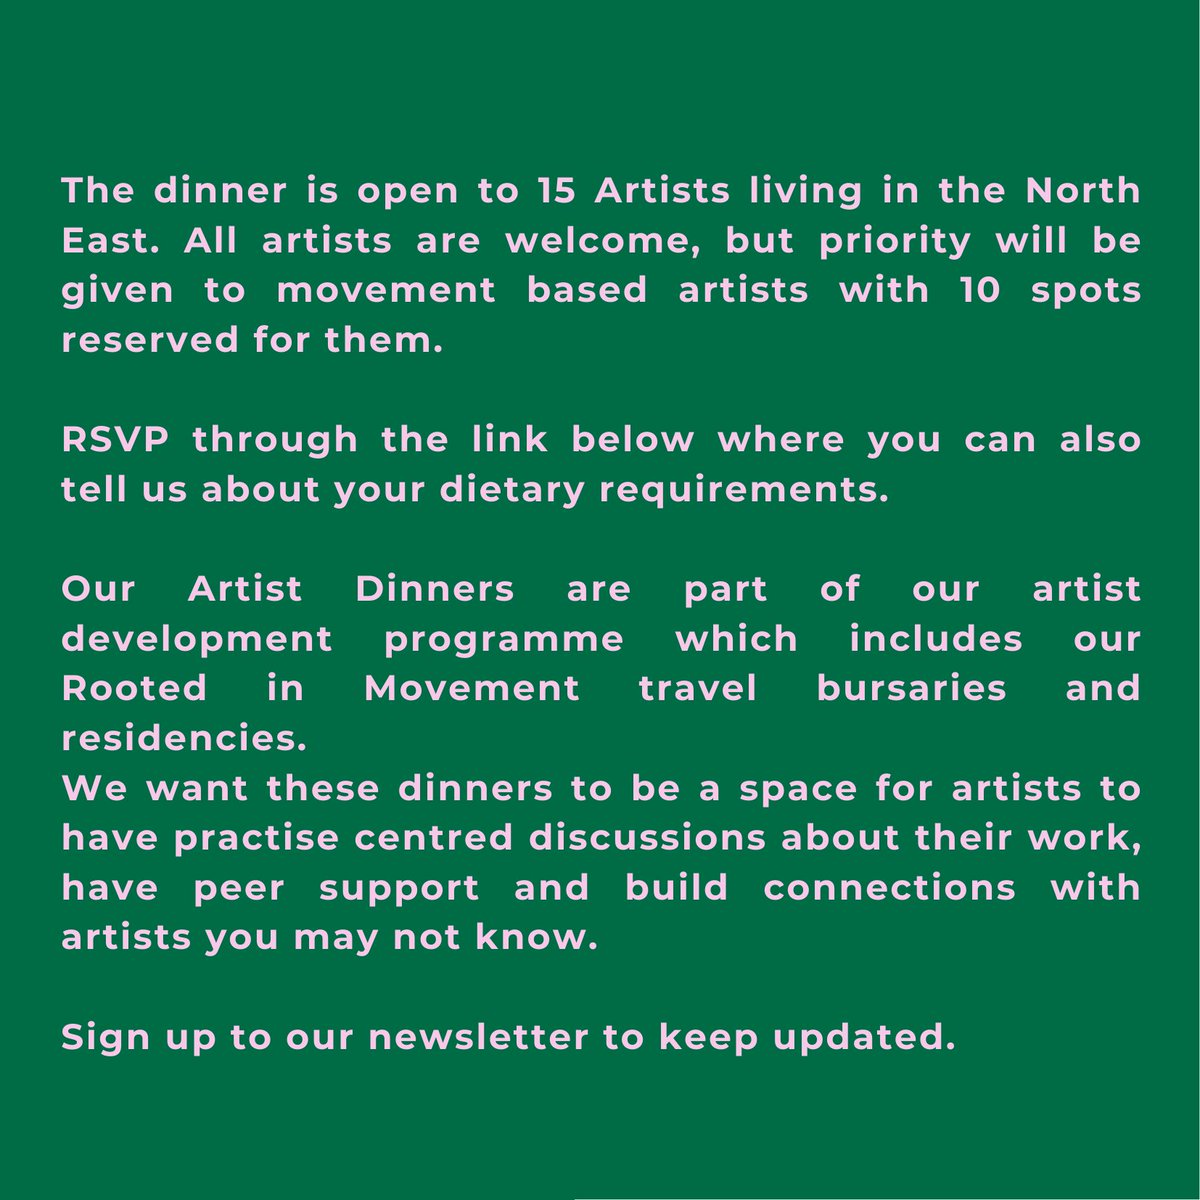 Company of Others' is having its first Artist’s Dinner hosted by Degna Stone at The Bricks! 📆 30th Jan 2024 ⏰ 7-9pm We're hosting 15 North East artists, with 10 reserved spots for movement-based artists so all artists are welcome. RSVP here: surveymonkey.com/r/JMNGJB3